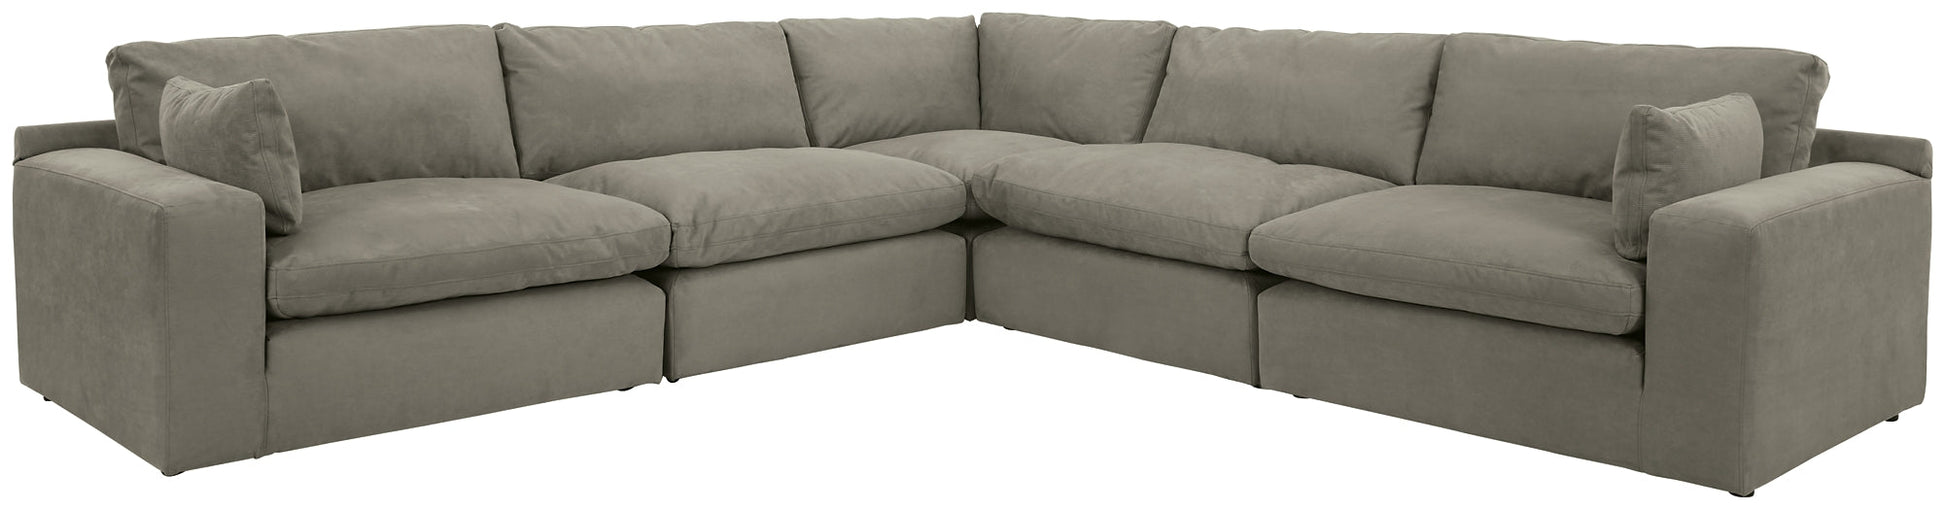 Next-Gen Gaucho 5-Piece Sectional Rent Wise Rent To Own Jacksonville, Florida